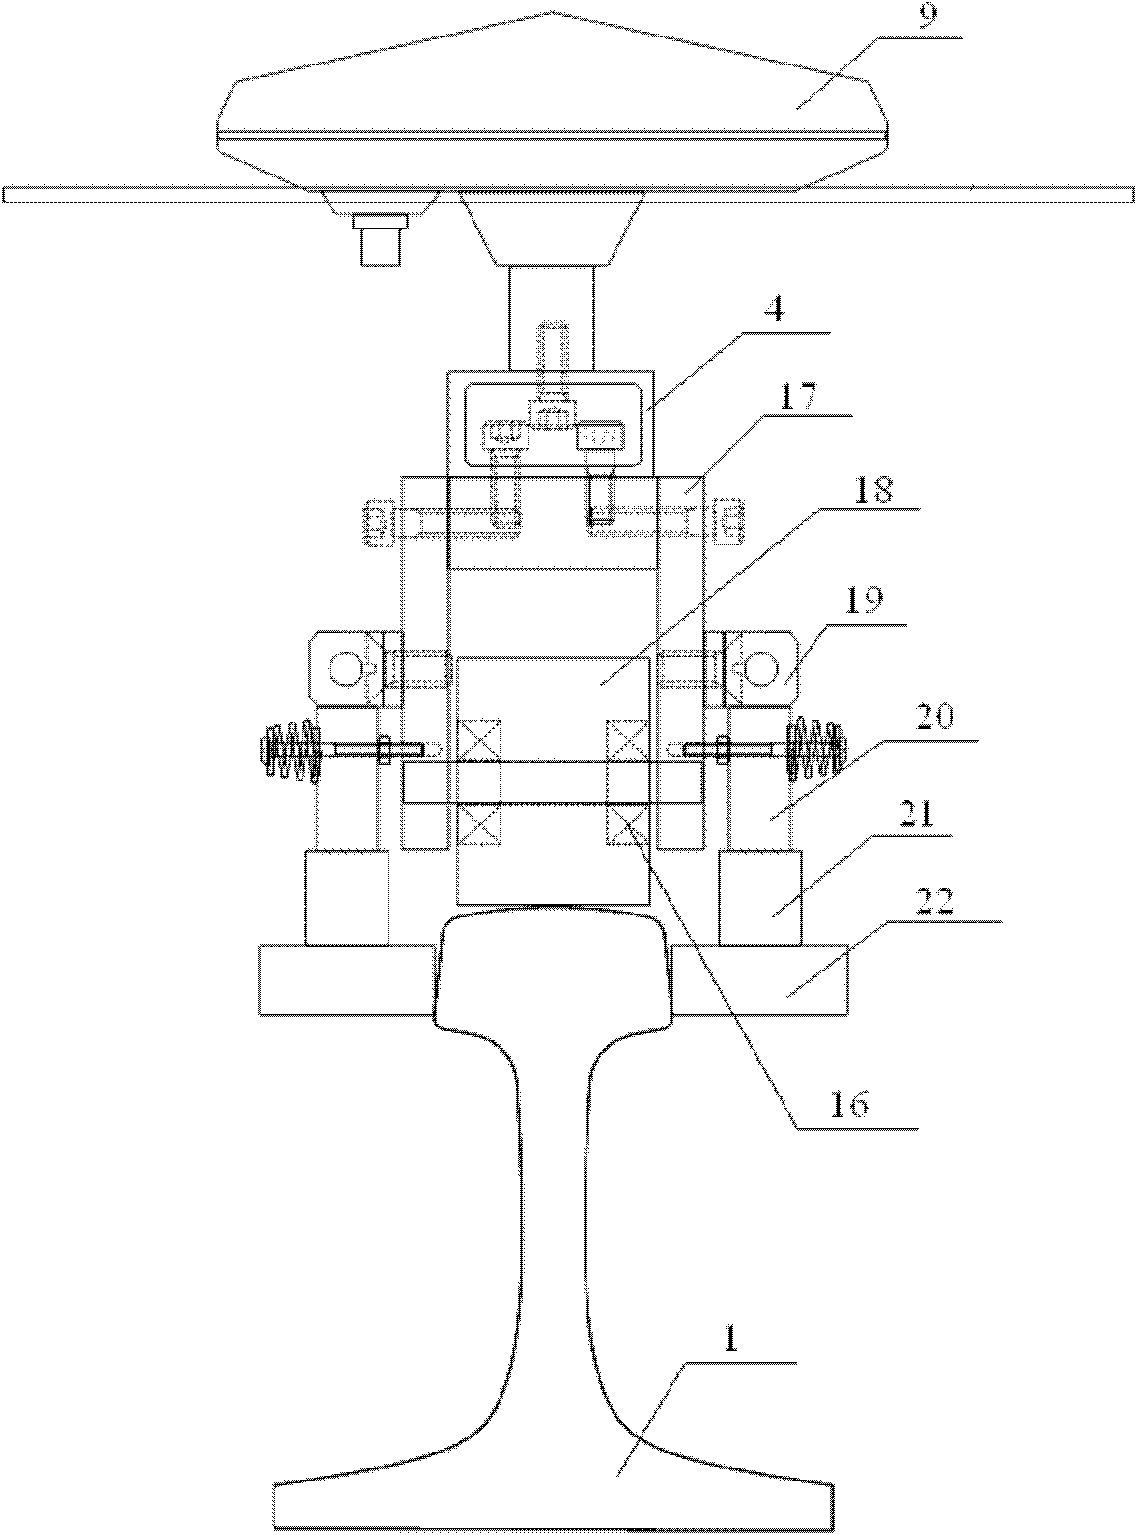 GPS (Global Positioning System) track irregularity detection system and method